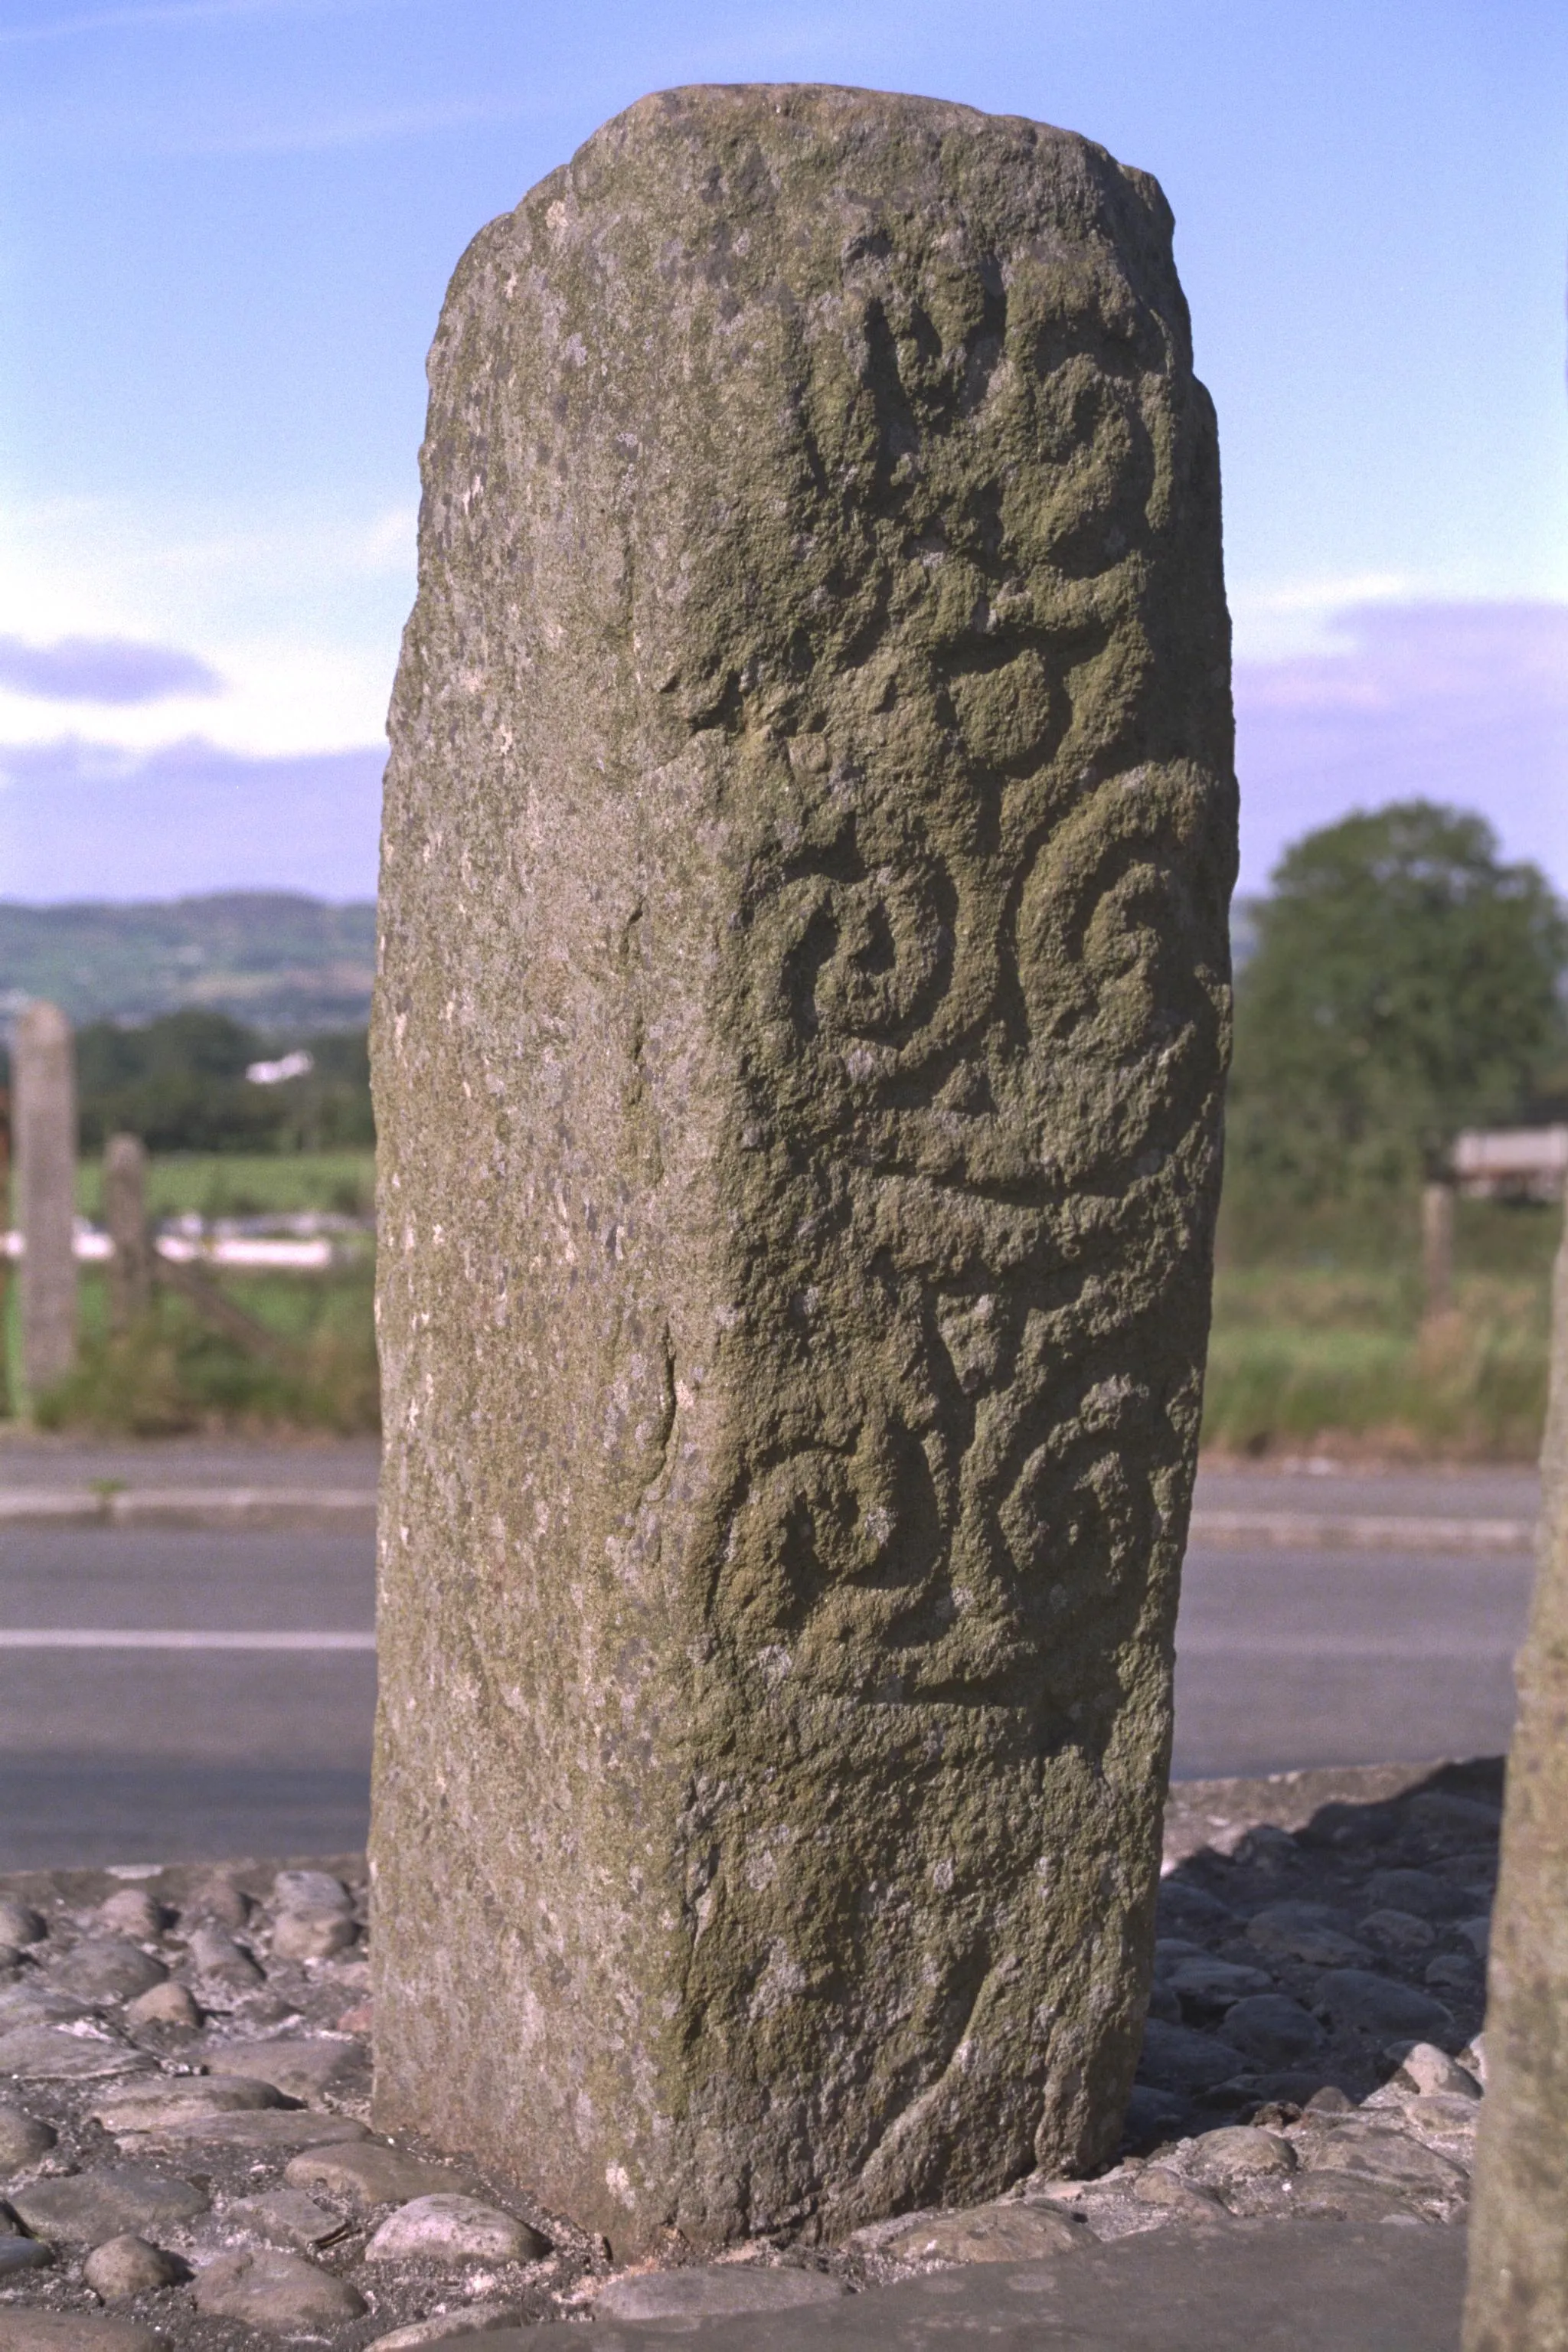 Photo showing: Carndonagh High Cross, County Donegal, Ireland

South side of the Northern Pillar